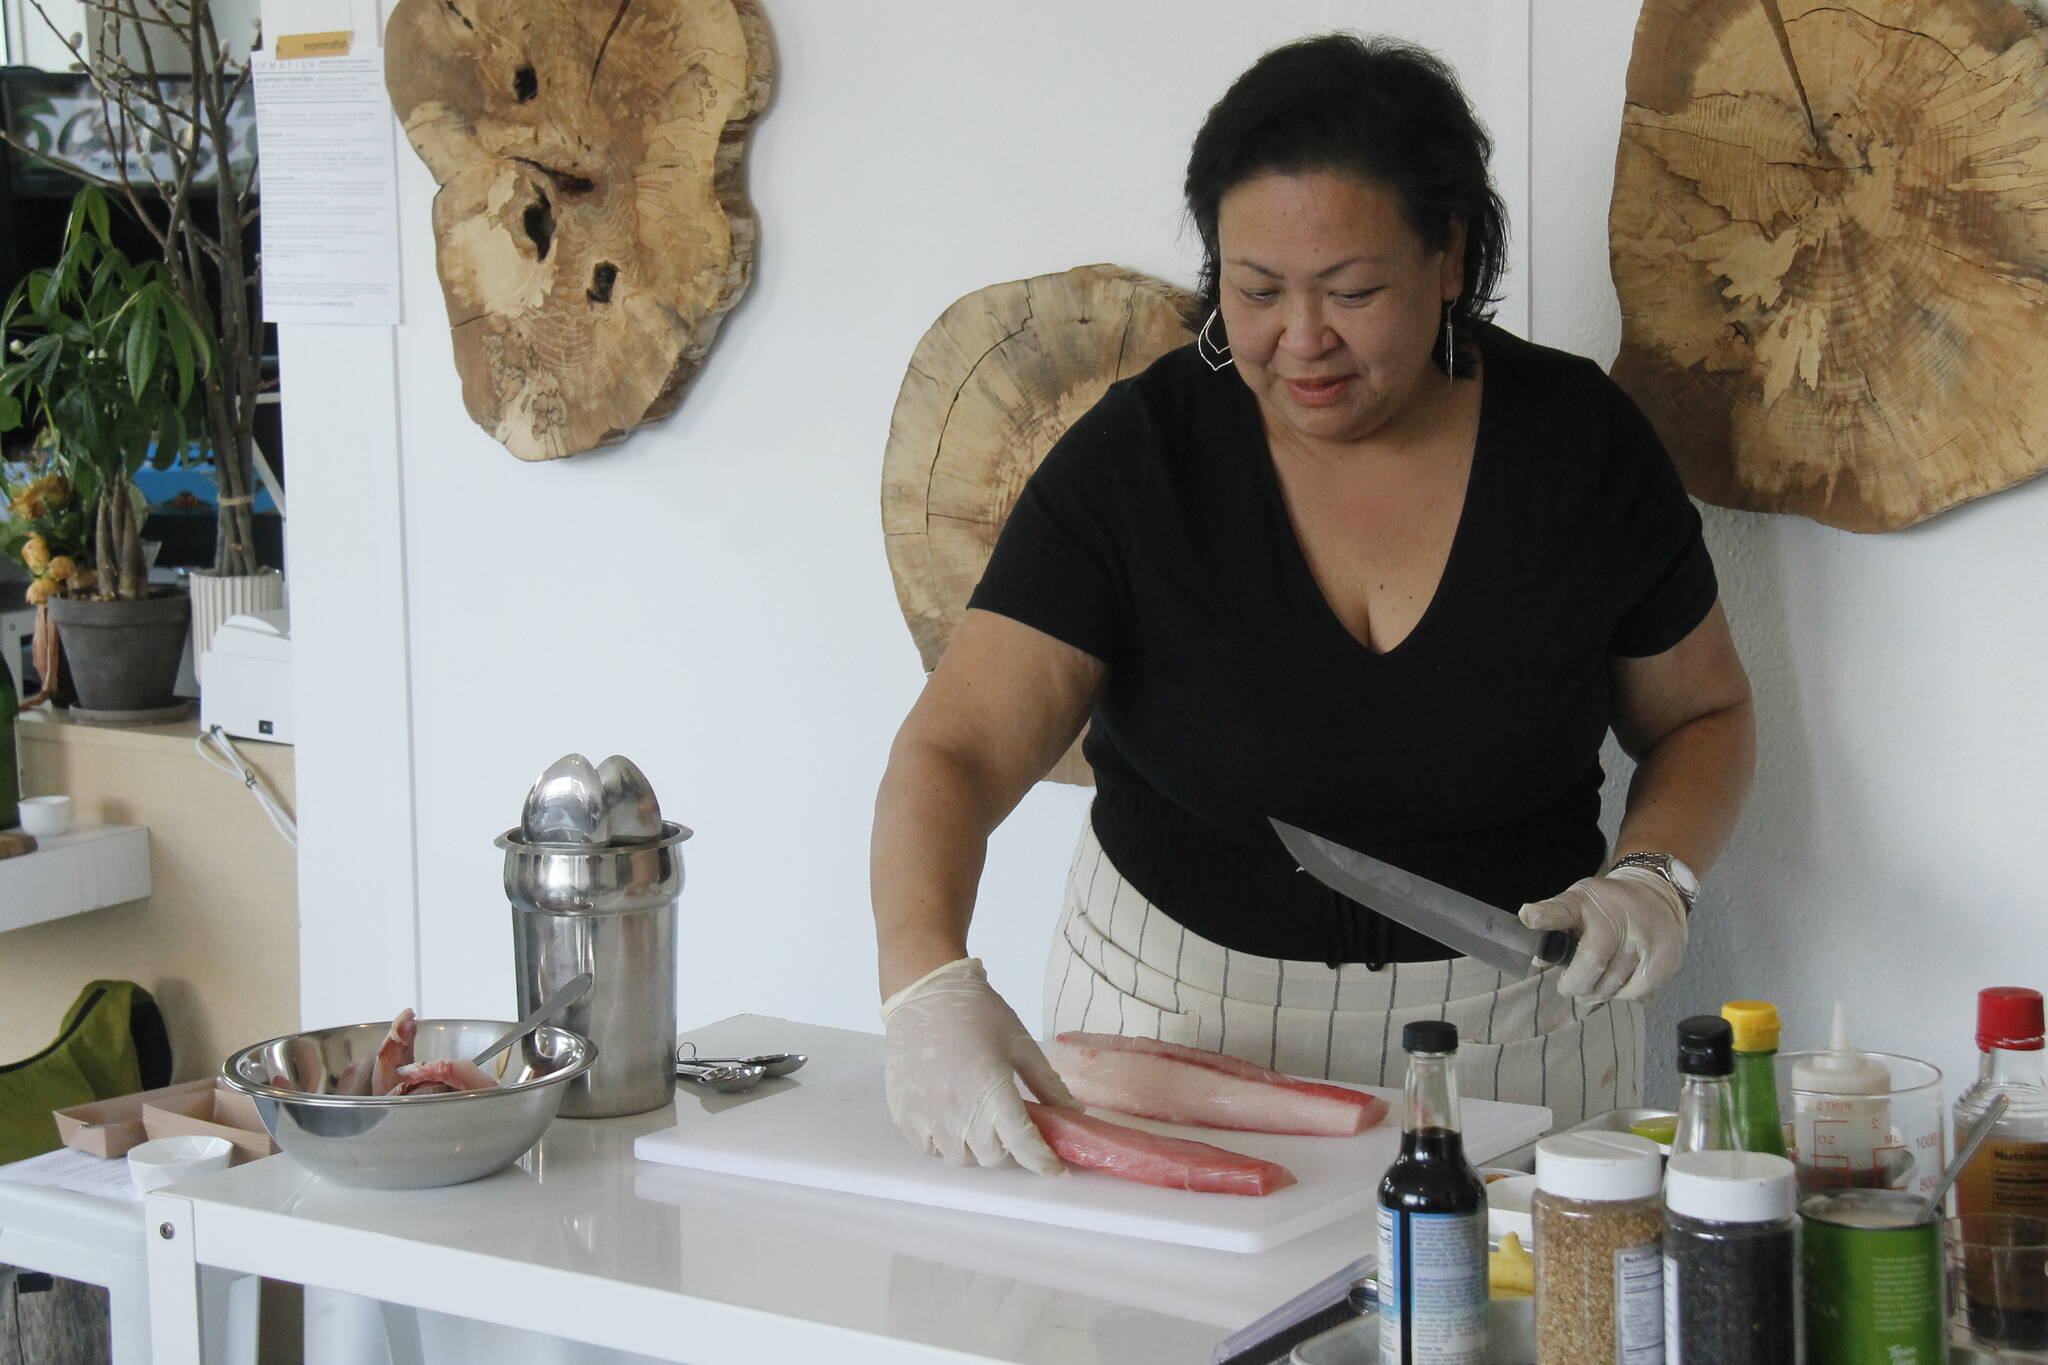 Joan Samson, owner of Mommafish, uses a left-handed Yanagi knife to cut fish during a recent supper club event at her restaurant in Langley. (Photo by Kira Erickson/South Whidbey Record)